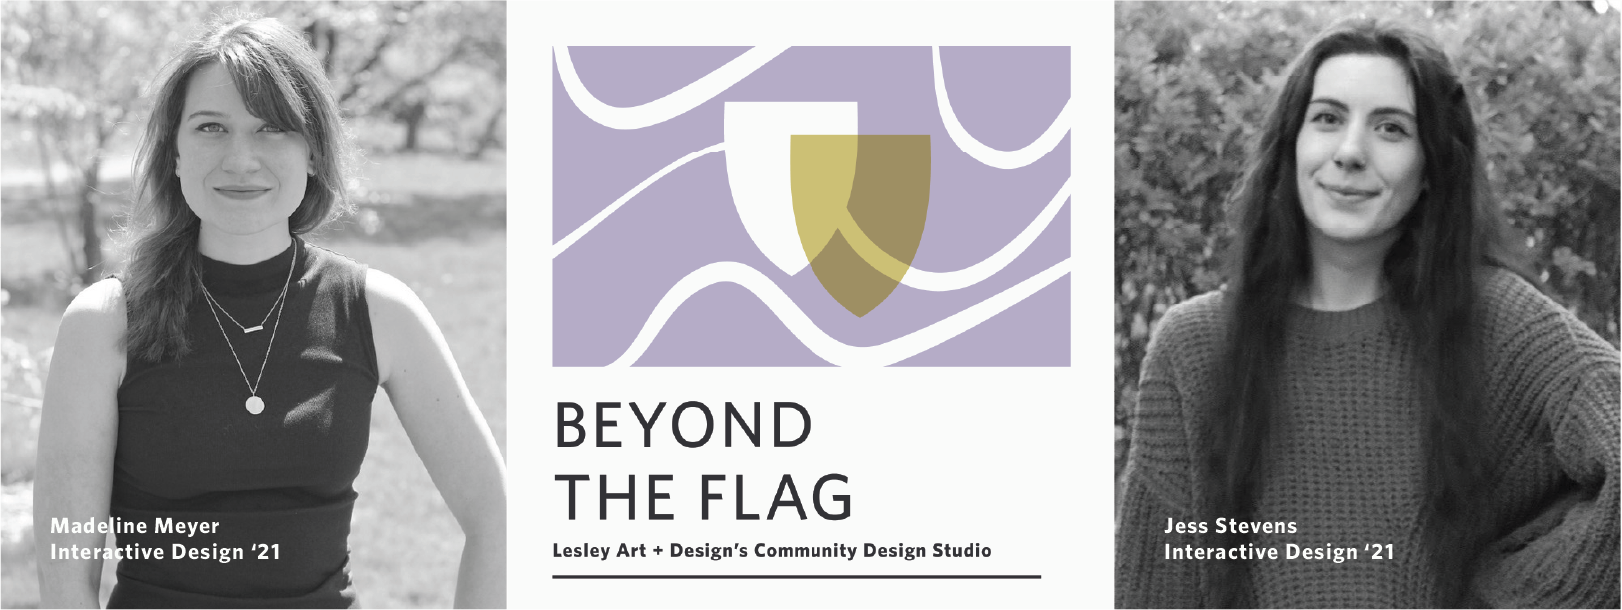 A banner for the Beyond the Flag Podcast. From left to right: Headshot of Madeline Meyer, Interactive Design '21, a logo for the Beyond the Flag Podcast, Jess Stevens, Interactive Design '21